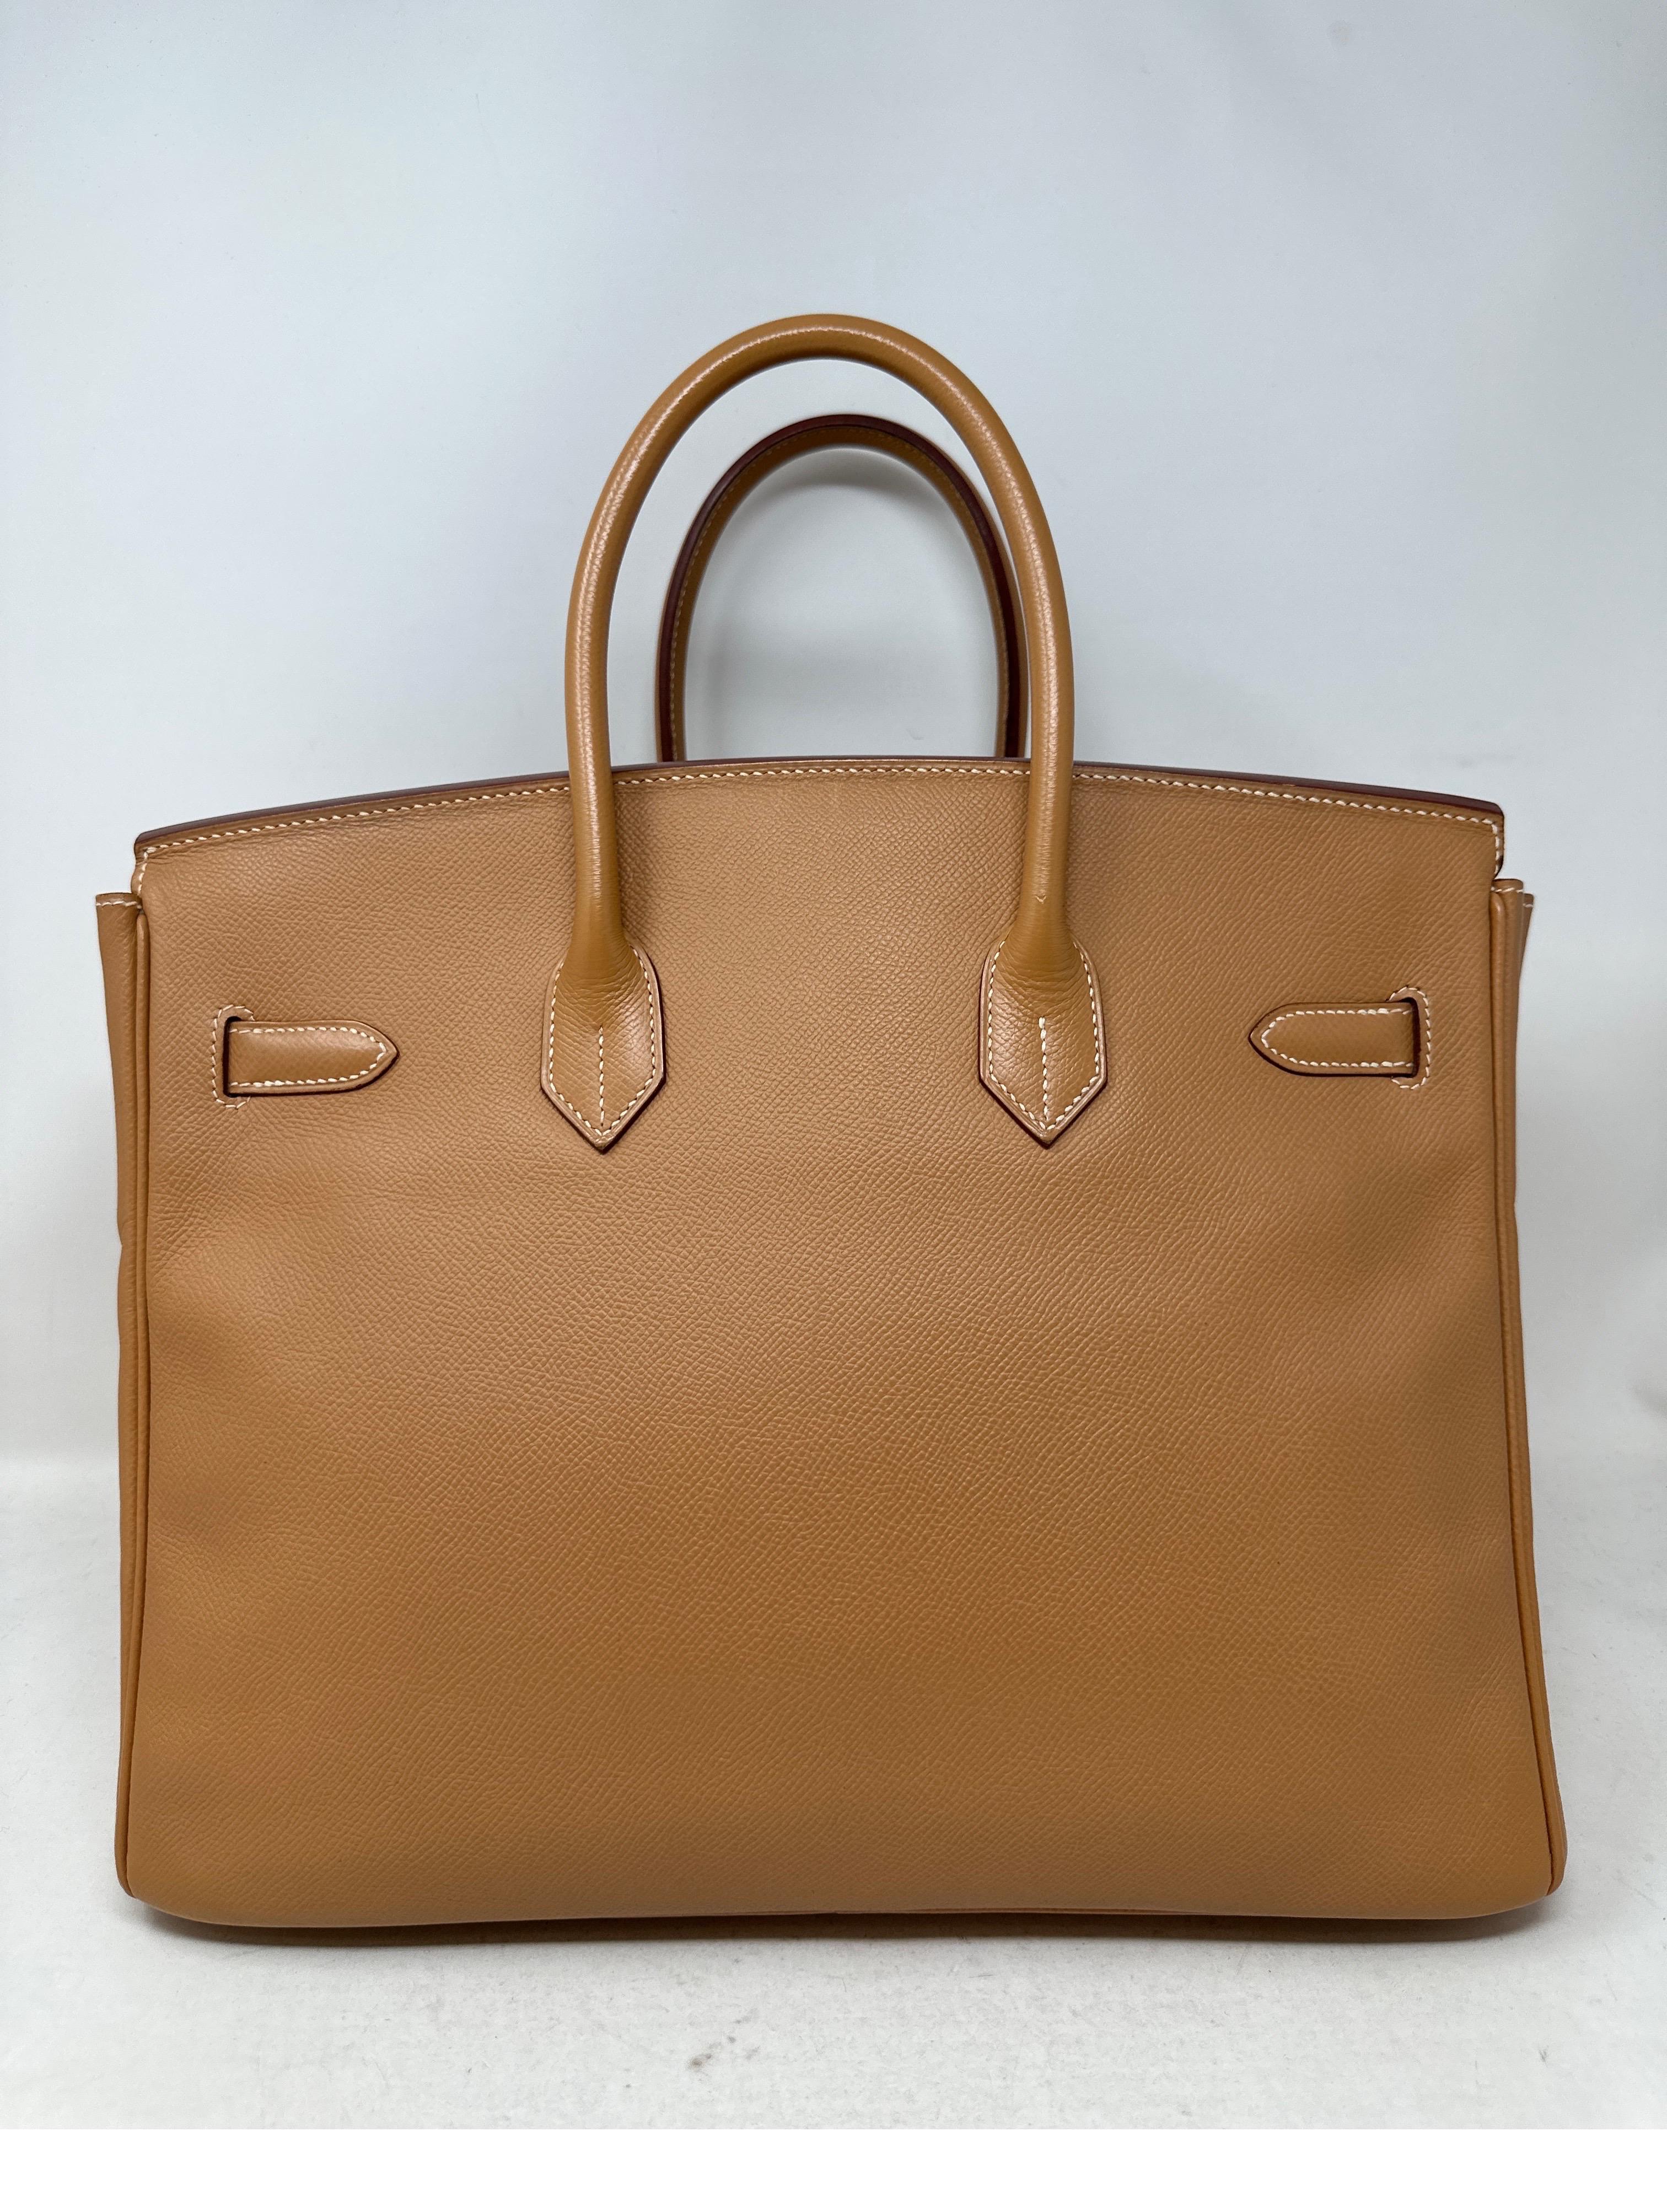 Hermes Natural Tan Birkin 35 Bag  In Good Condition For Sale In Athens, GA